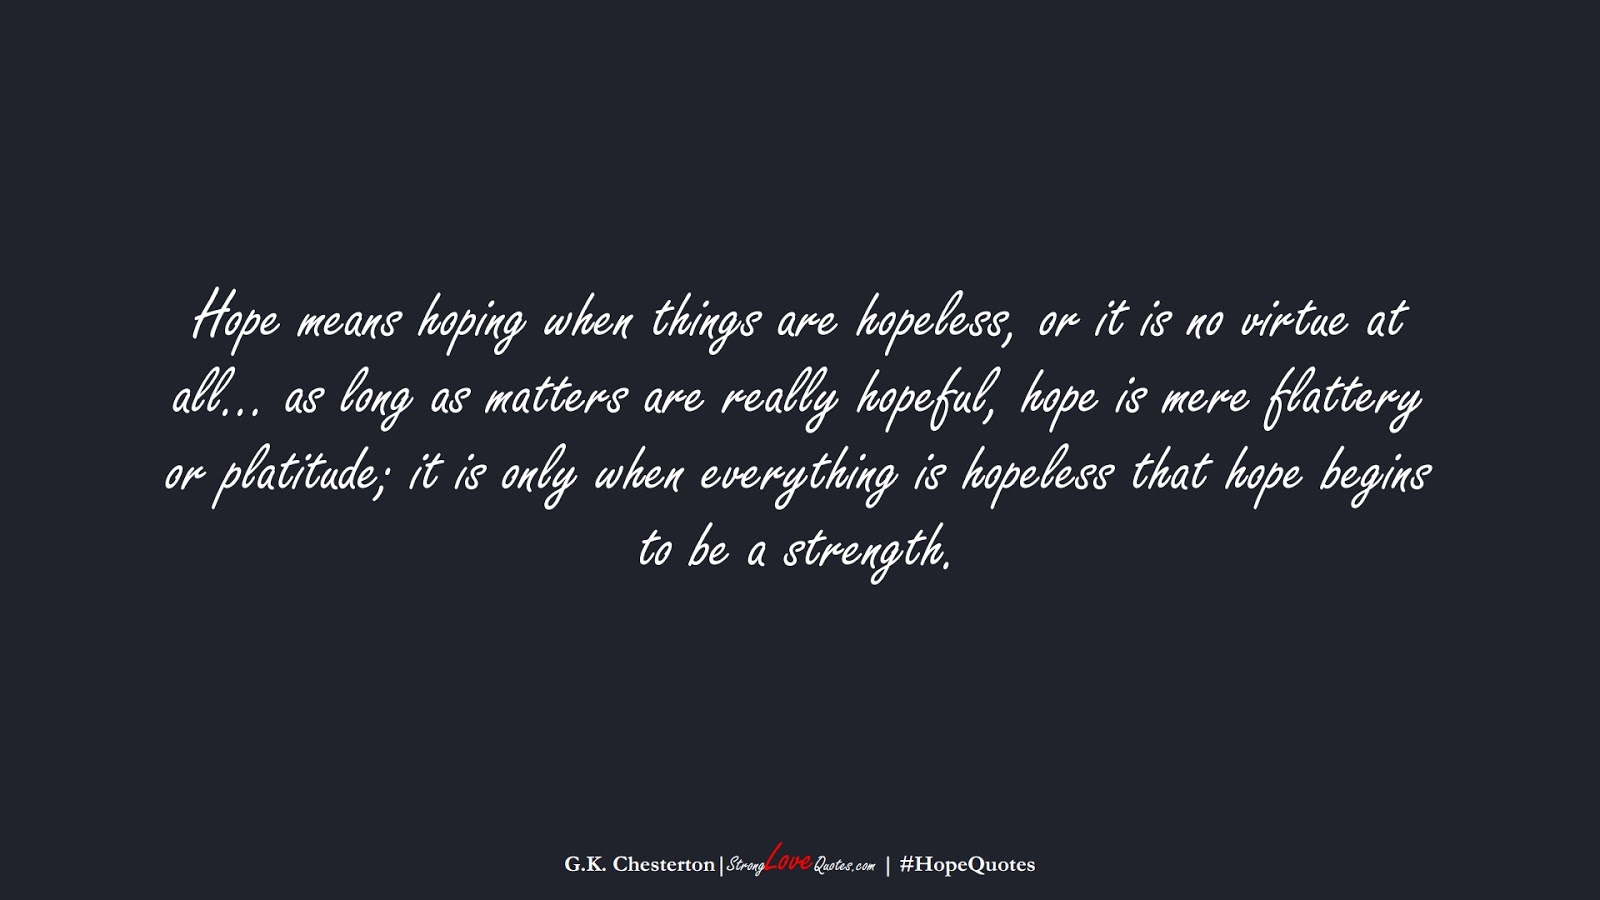 Hope means hoping when things are hopeless, or it is no virtue at all… as long as matters are really hopeful, hope is mere flattery or platitude; it is only when everything is hopeless that hope begins to be a strength. (G.K. Chesterton);  #HopeQuotes